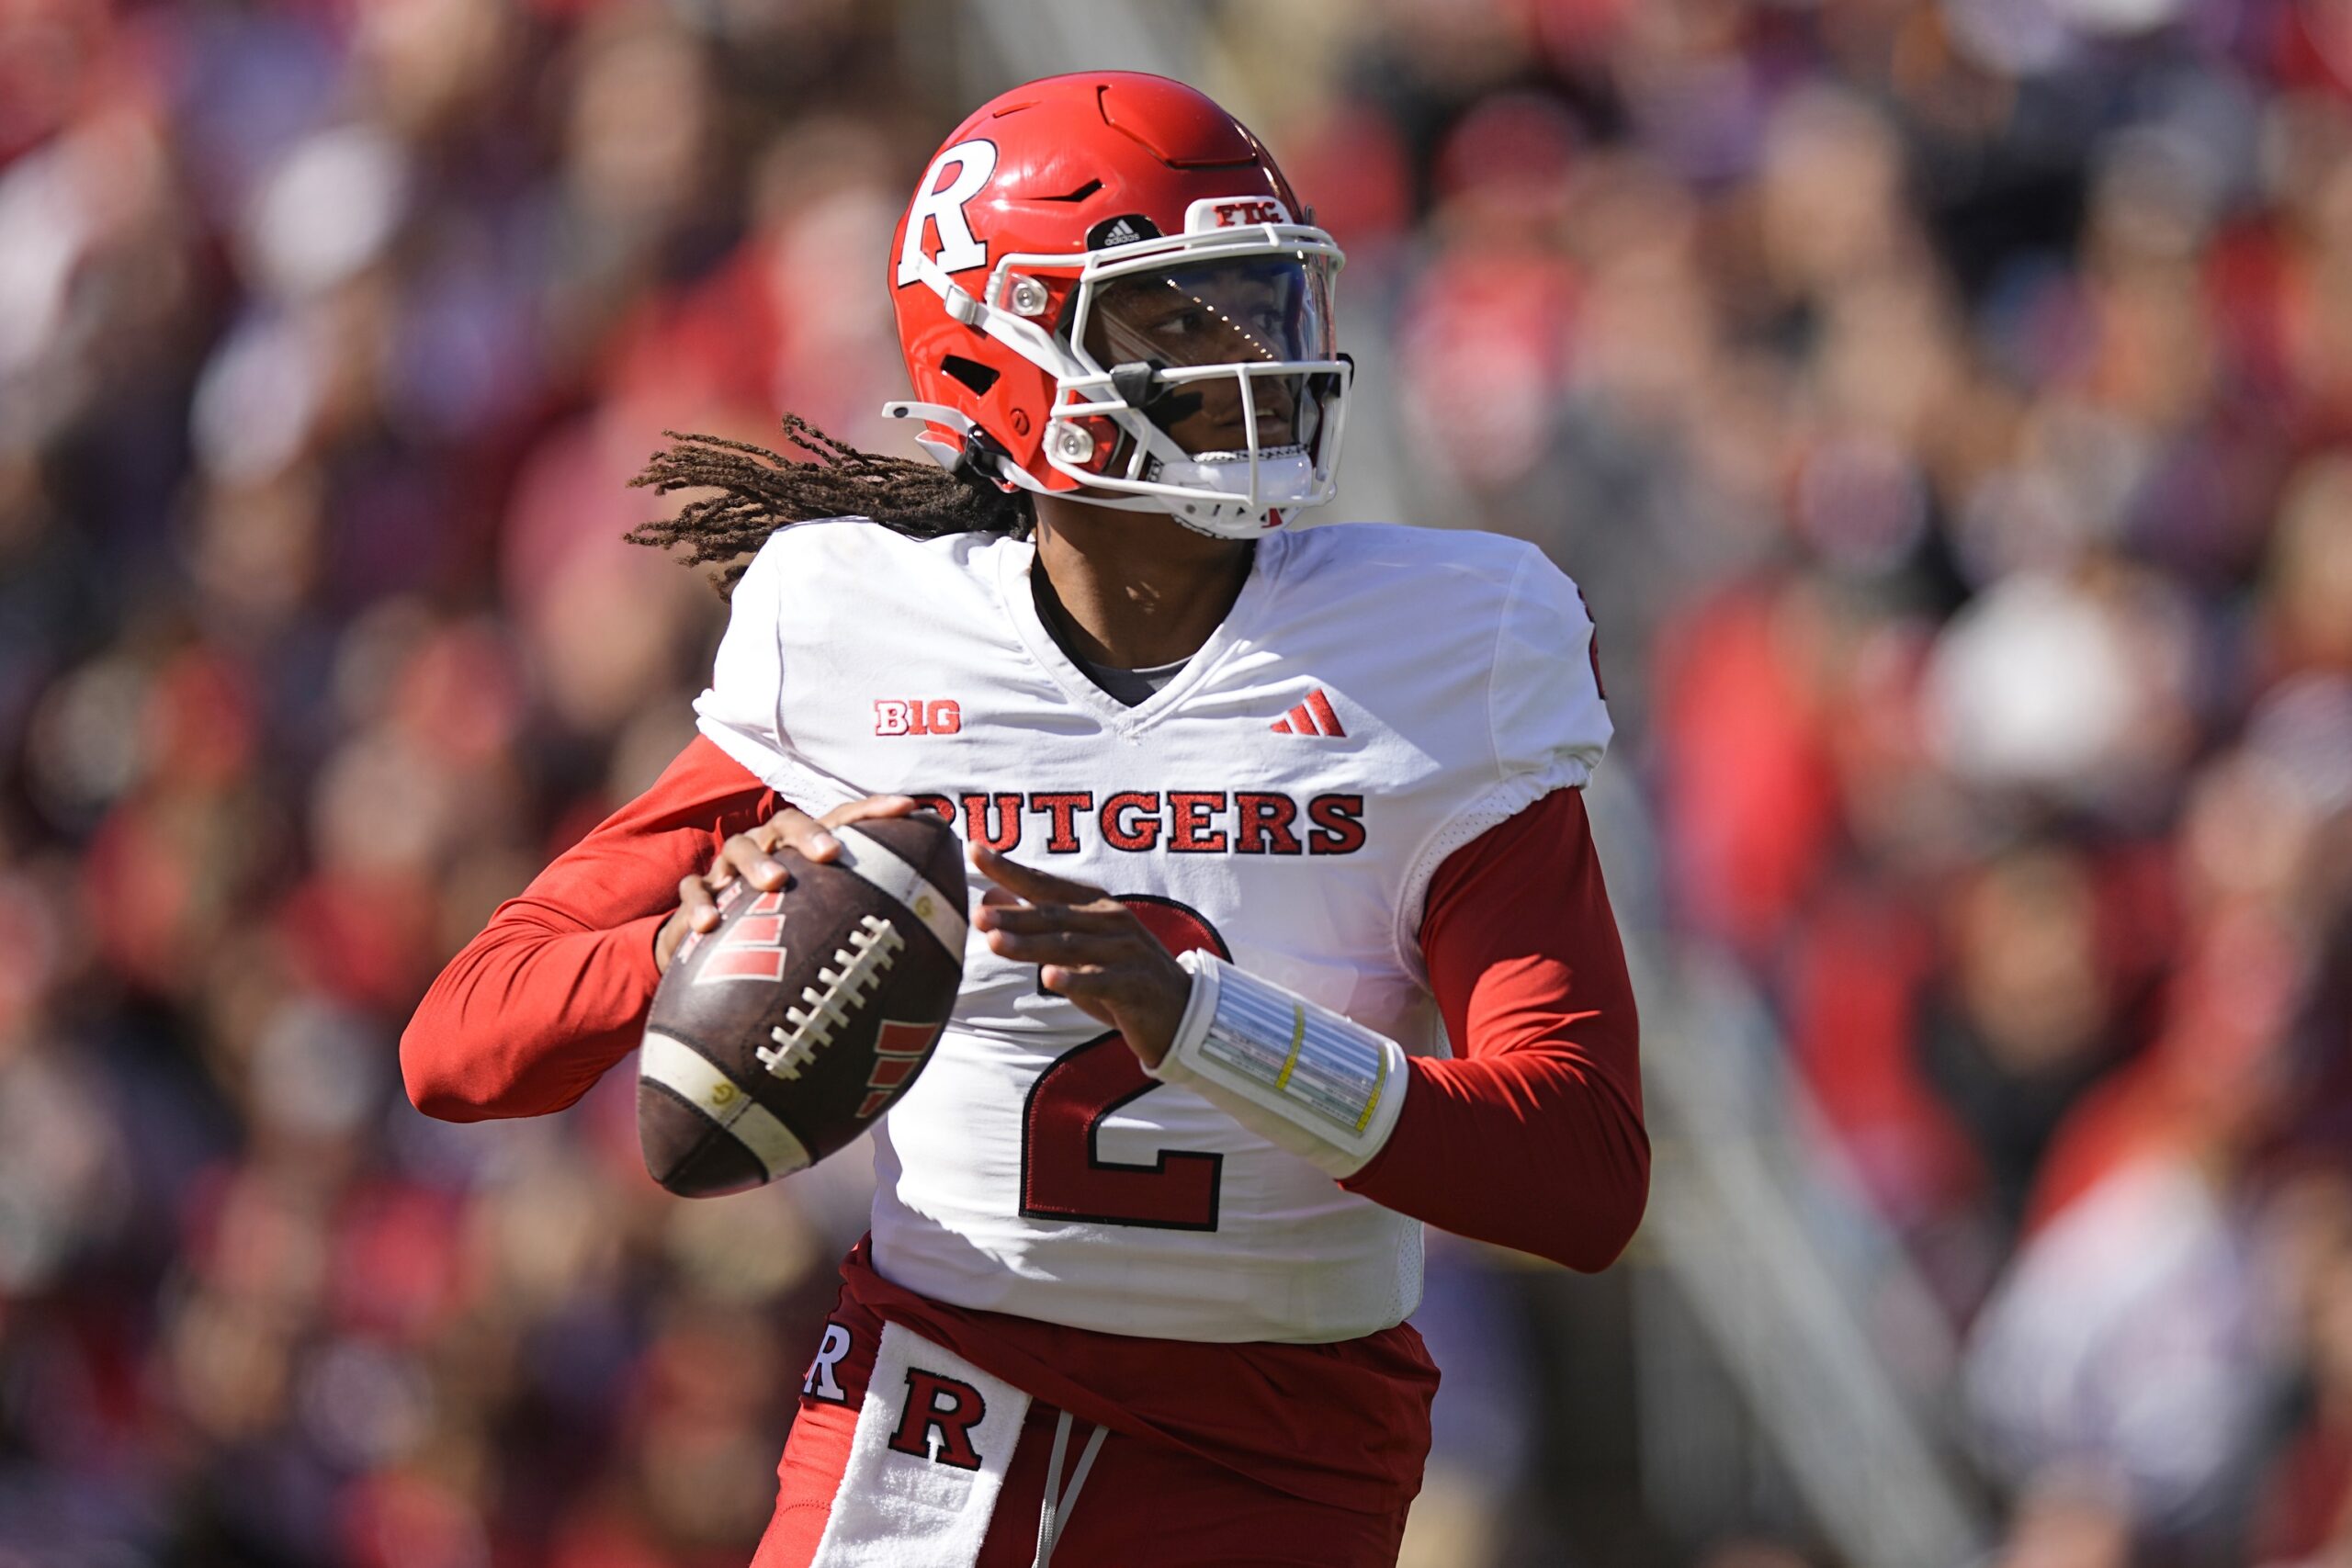 Q&A with The Scarlet Faithful on Rutgers vs. Michigan State